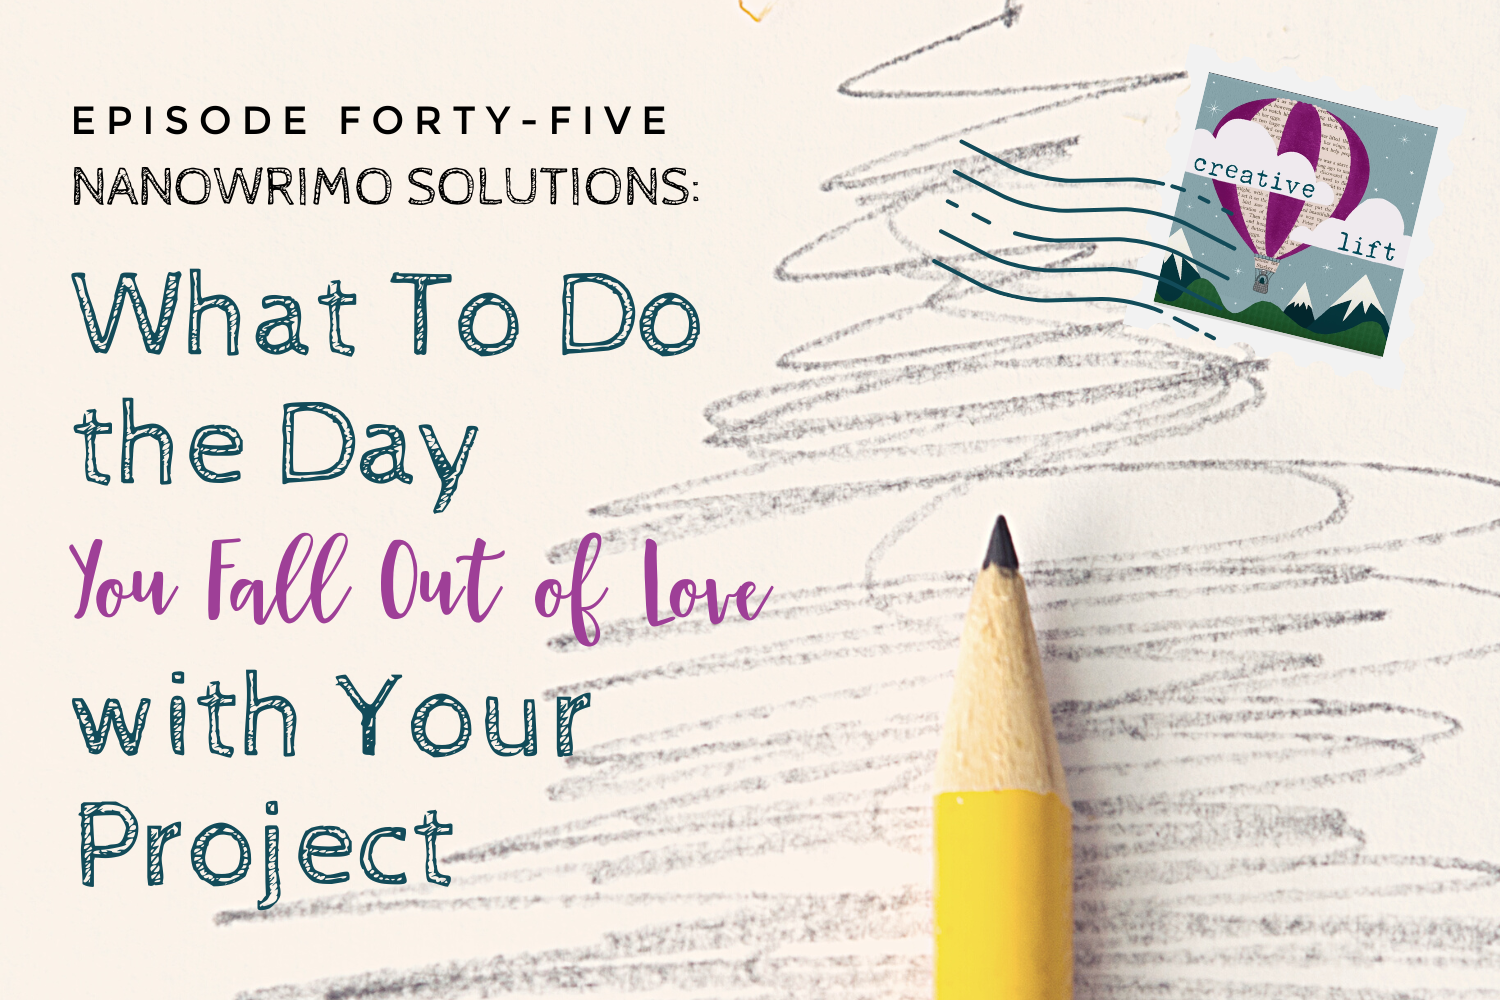 Creative Lift episode 045- NaNoWriMo Solutions: What To Do The Day You Fall Out of Love with Your Project